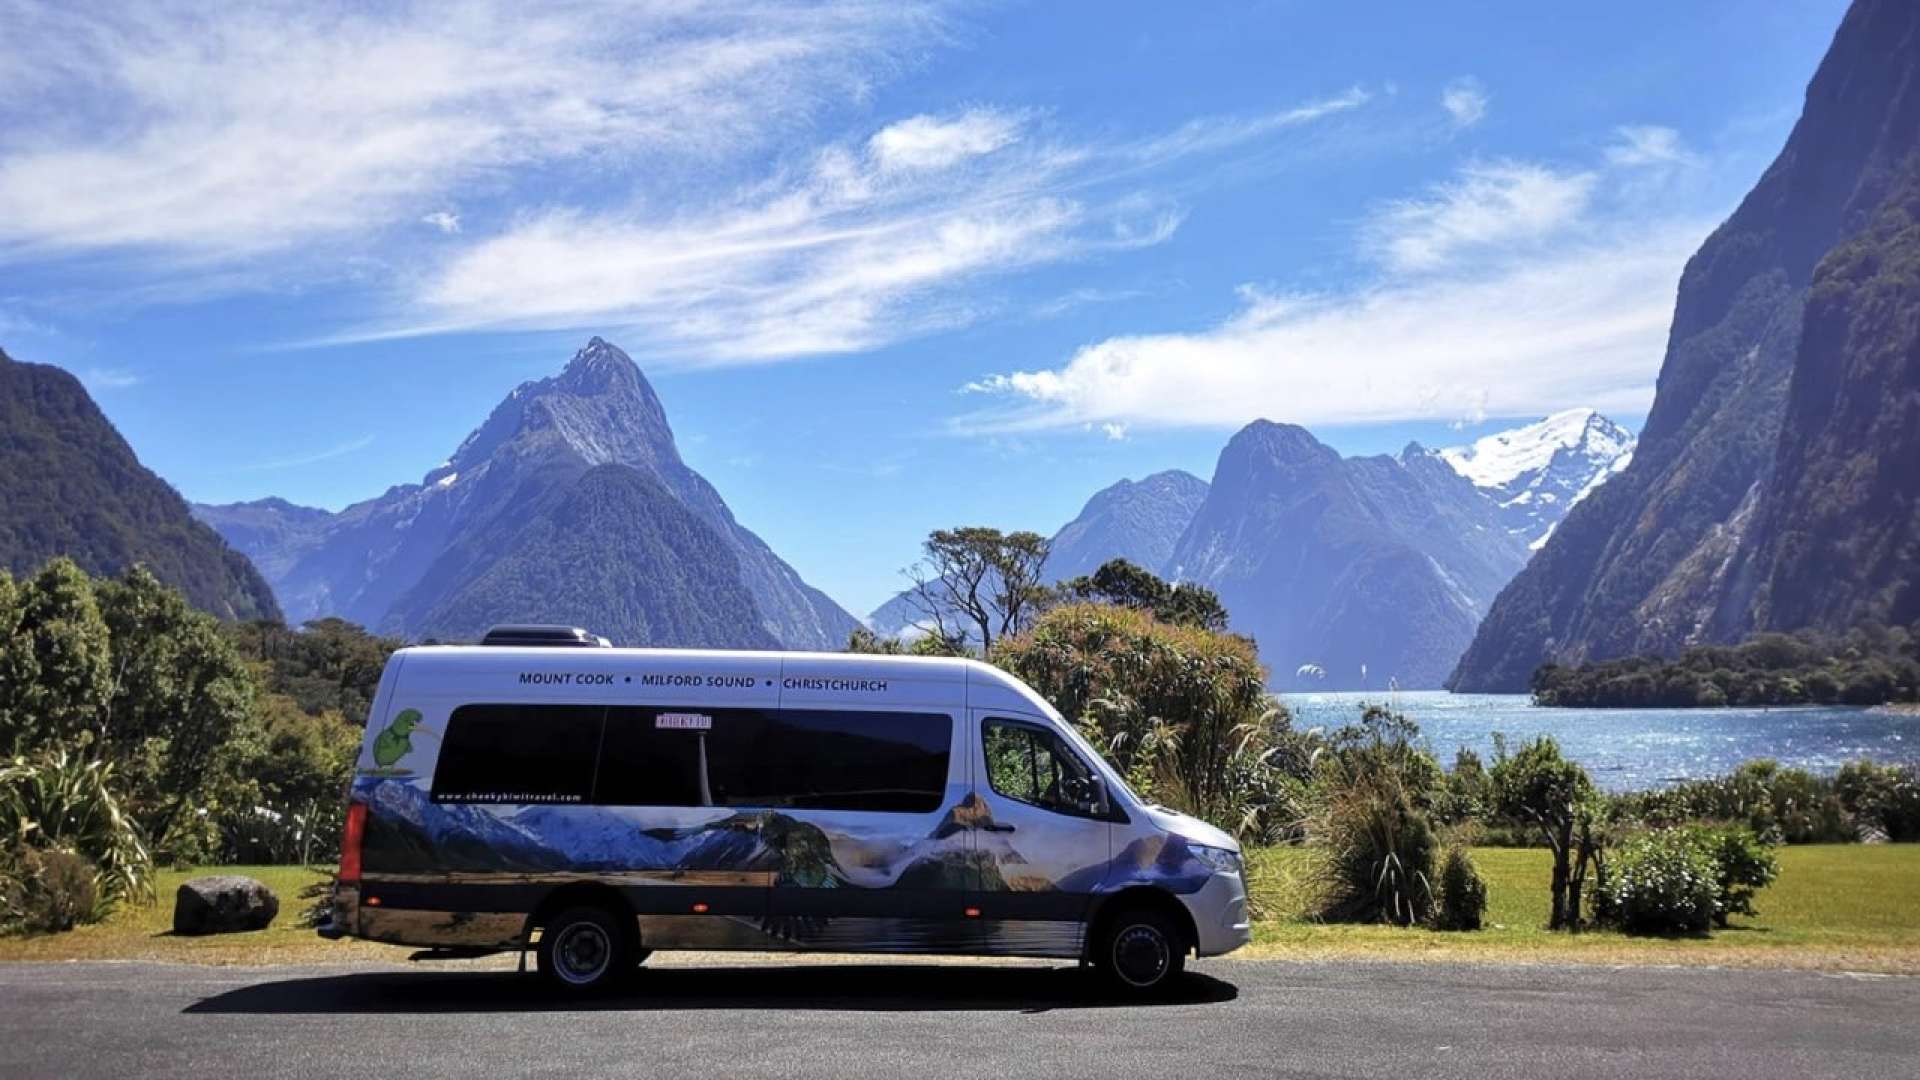 Travel to Milford Sound